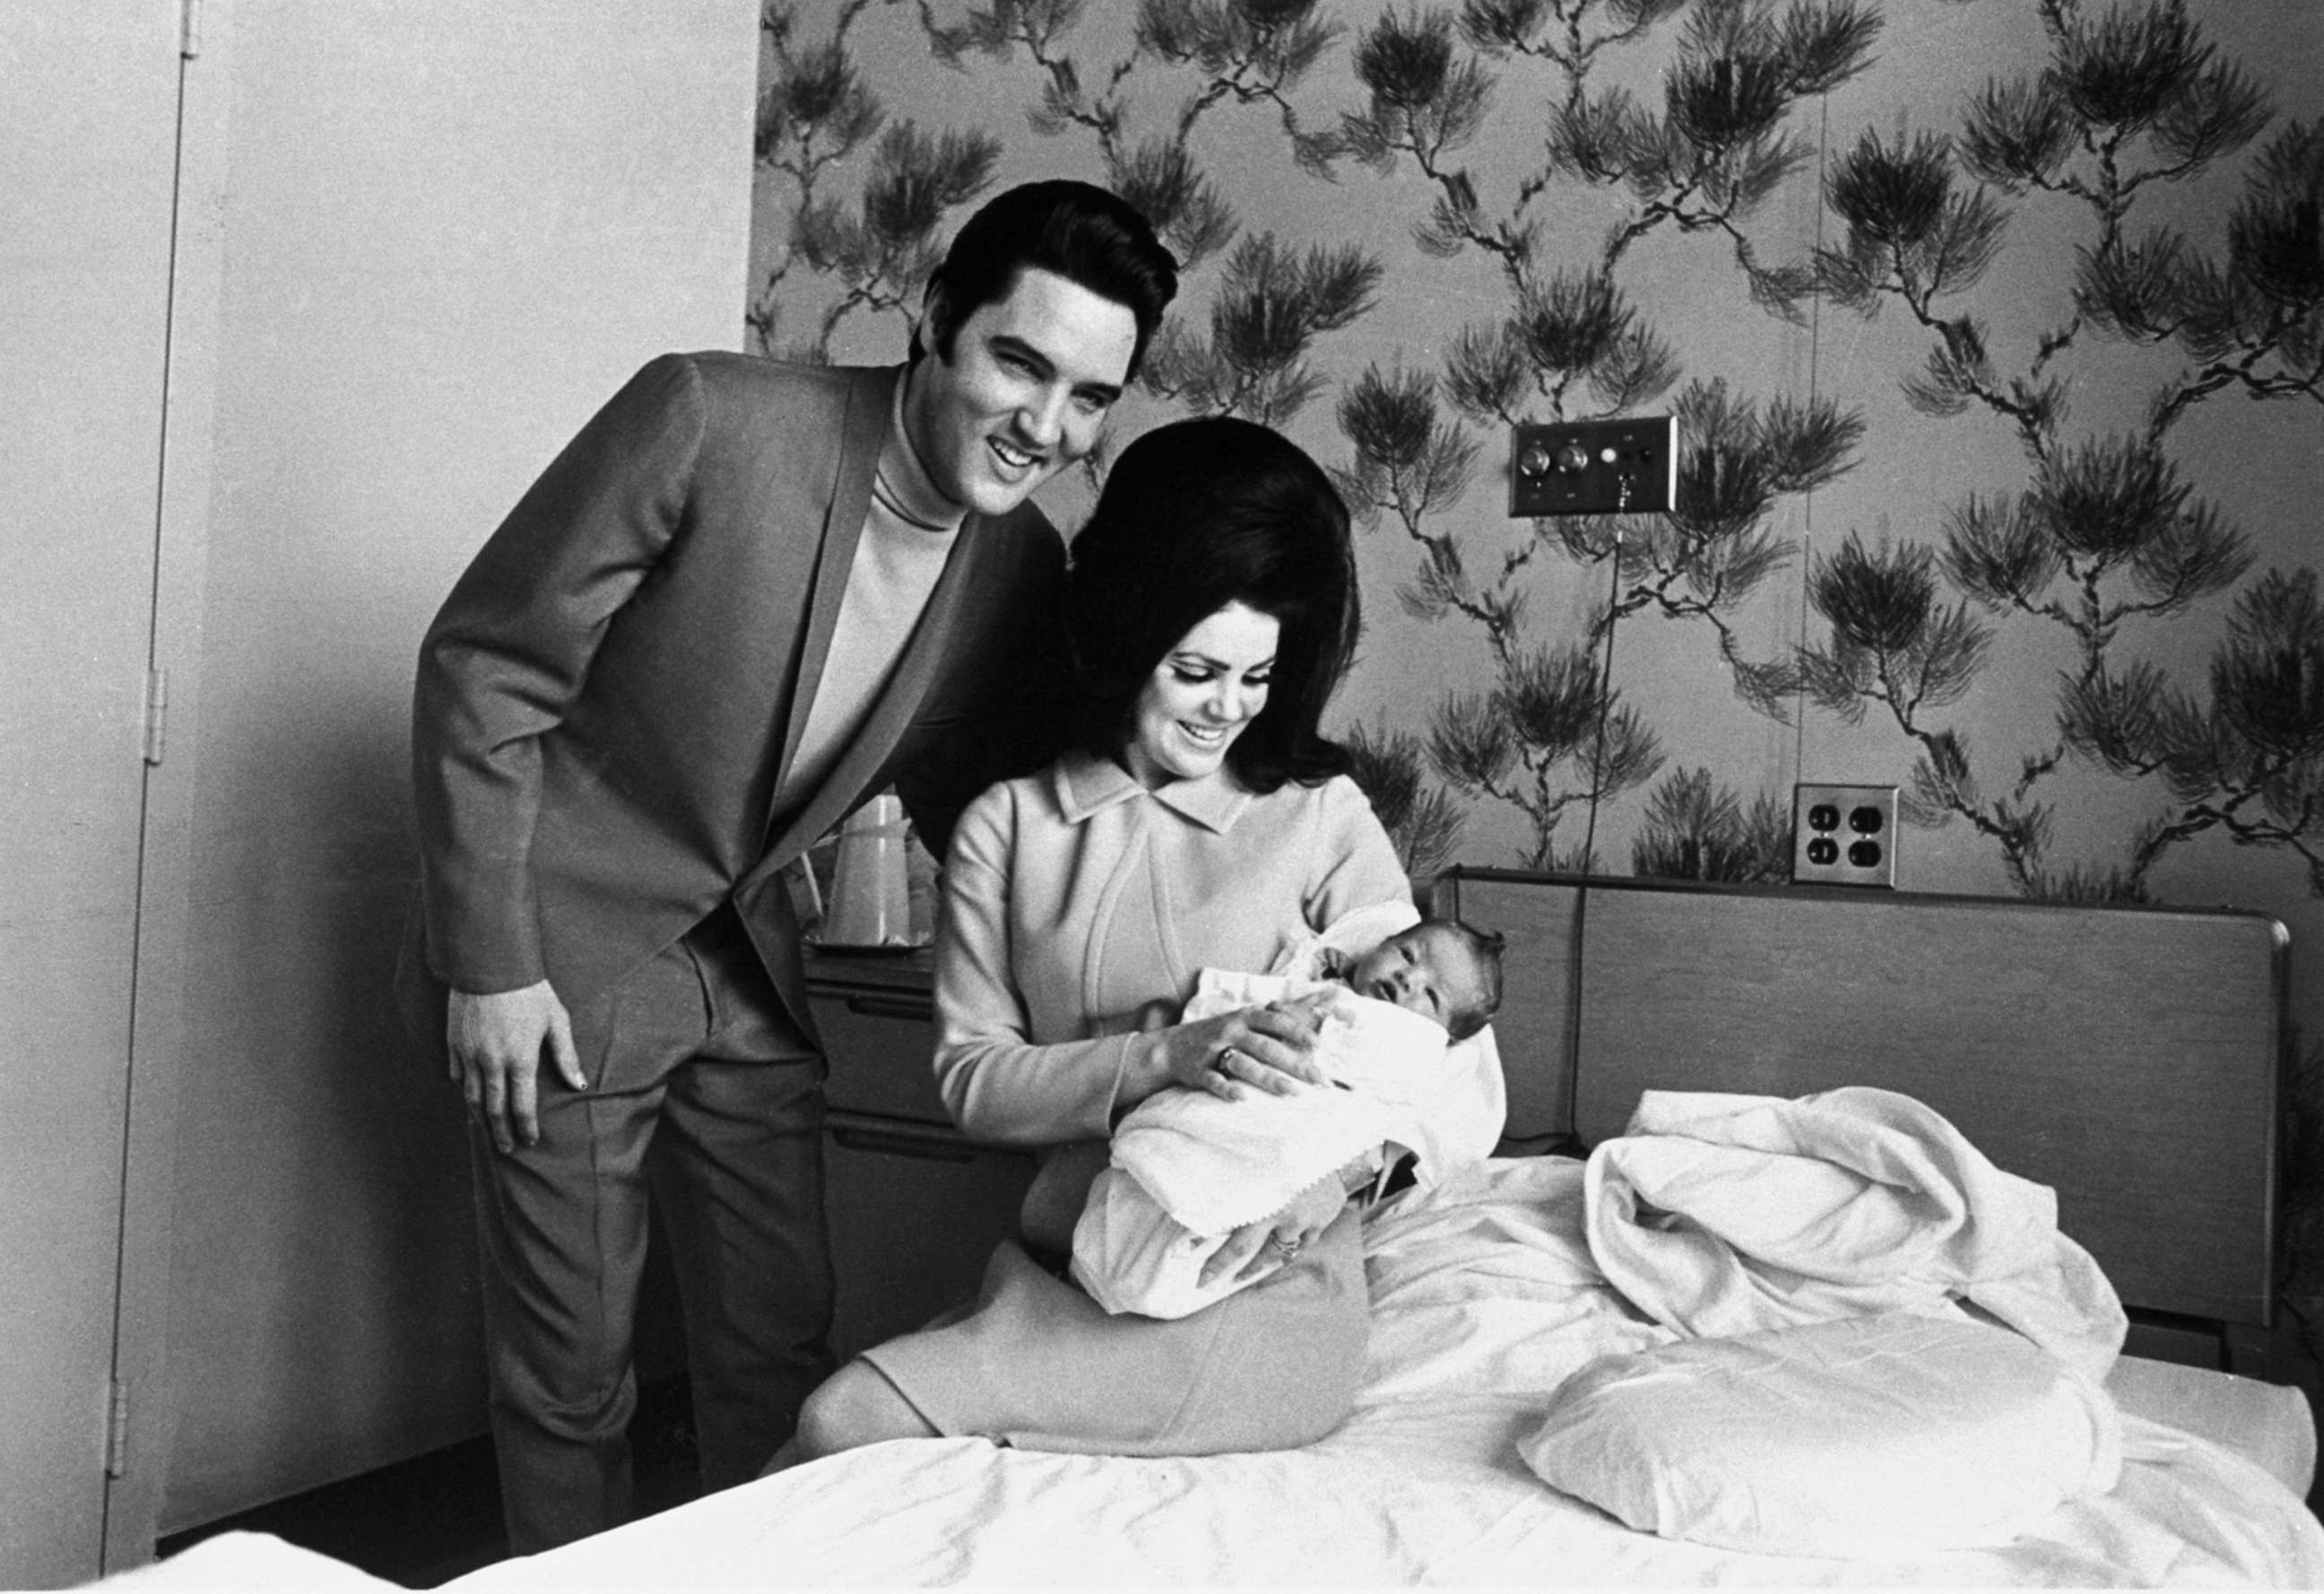 PHOTO: Lisa Marie Presley poses for her first picture in the lap of her mother, Priscilla, on Feb. 5, 1968, with her father, Elvis Presley.